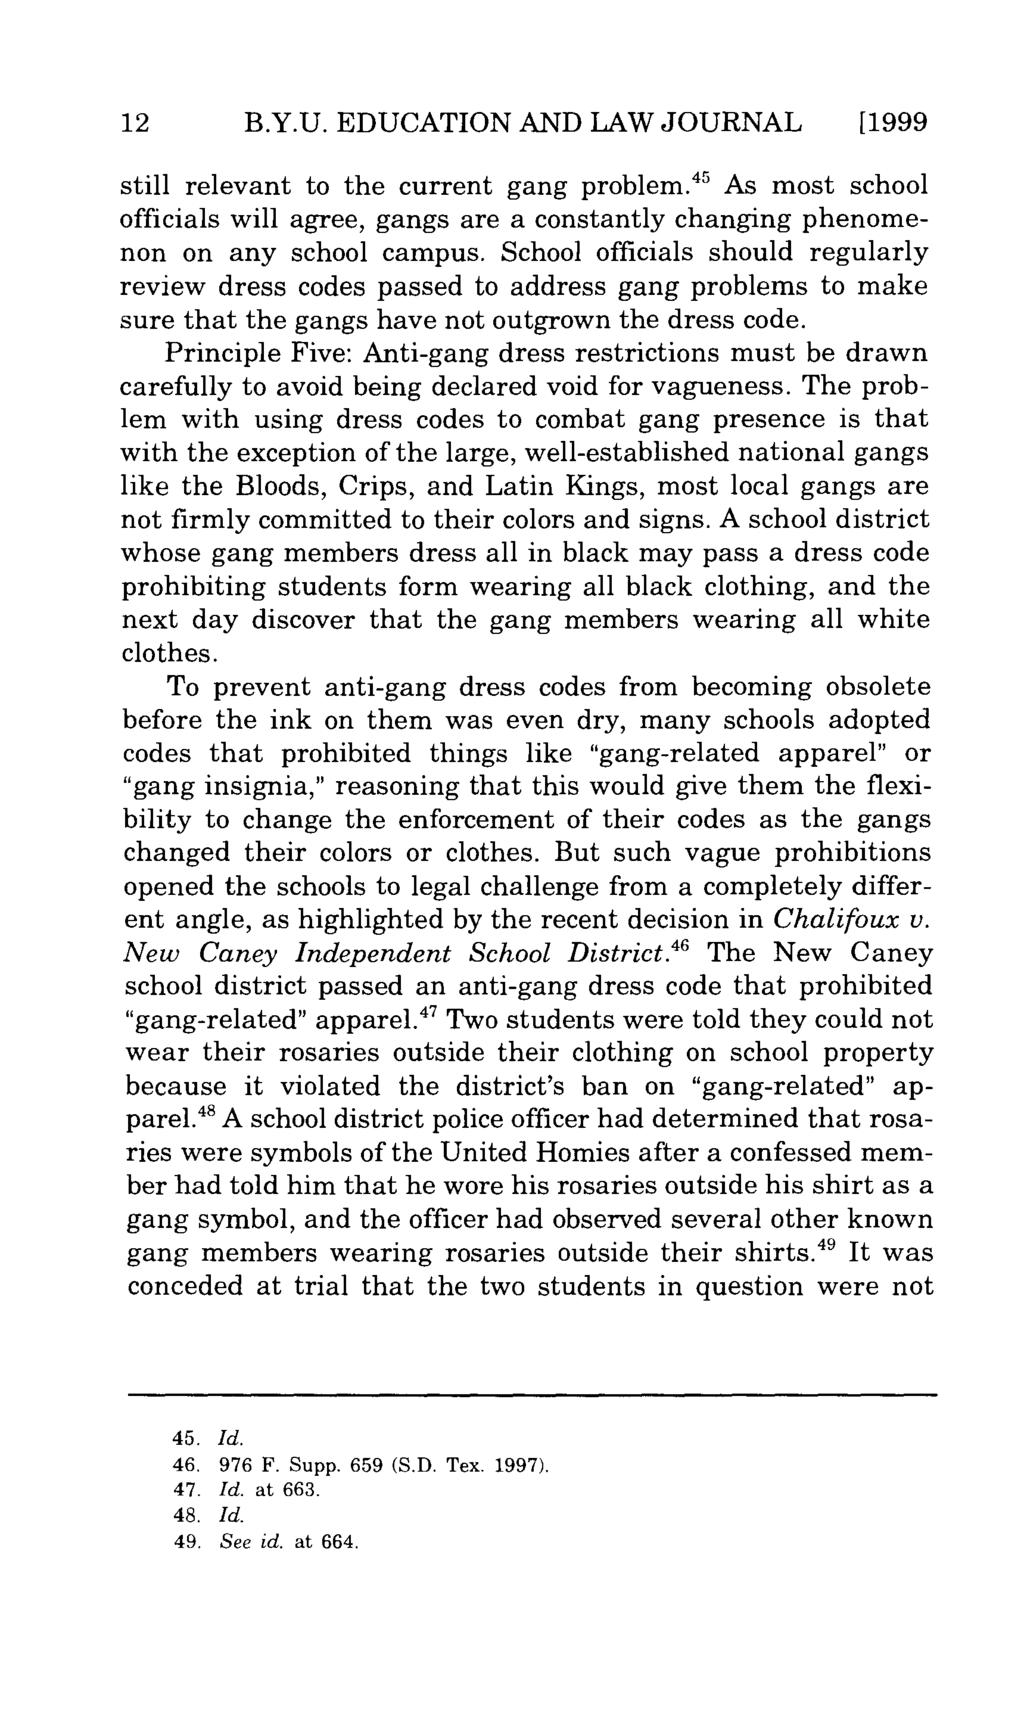 12 B.Y.U. EDUCATION AND LAW JOURNAL [1999 still relevant to the current gang problem. 45 As most school officials will agree, gangs are a constantly changing phenomenon on any school campus.